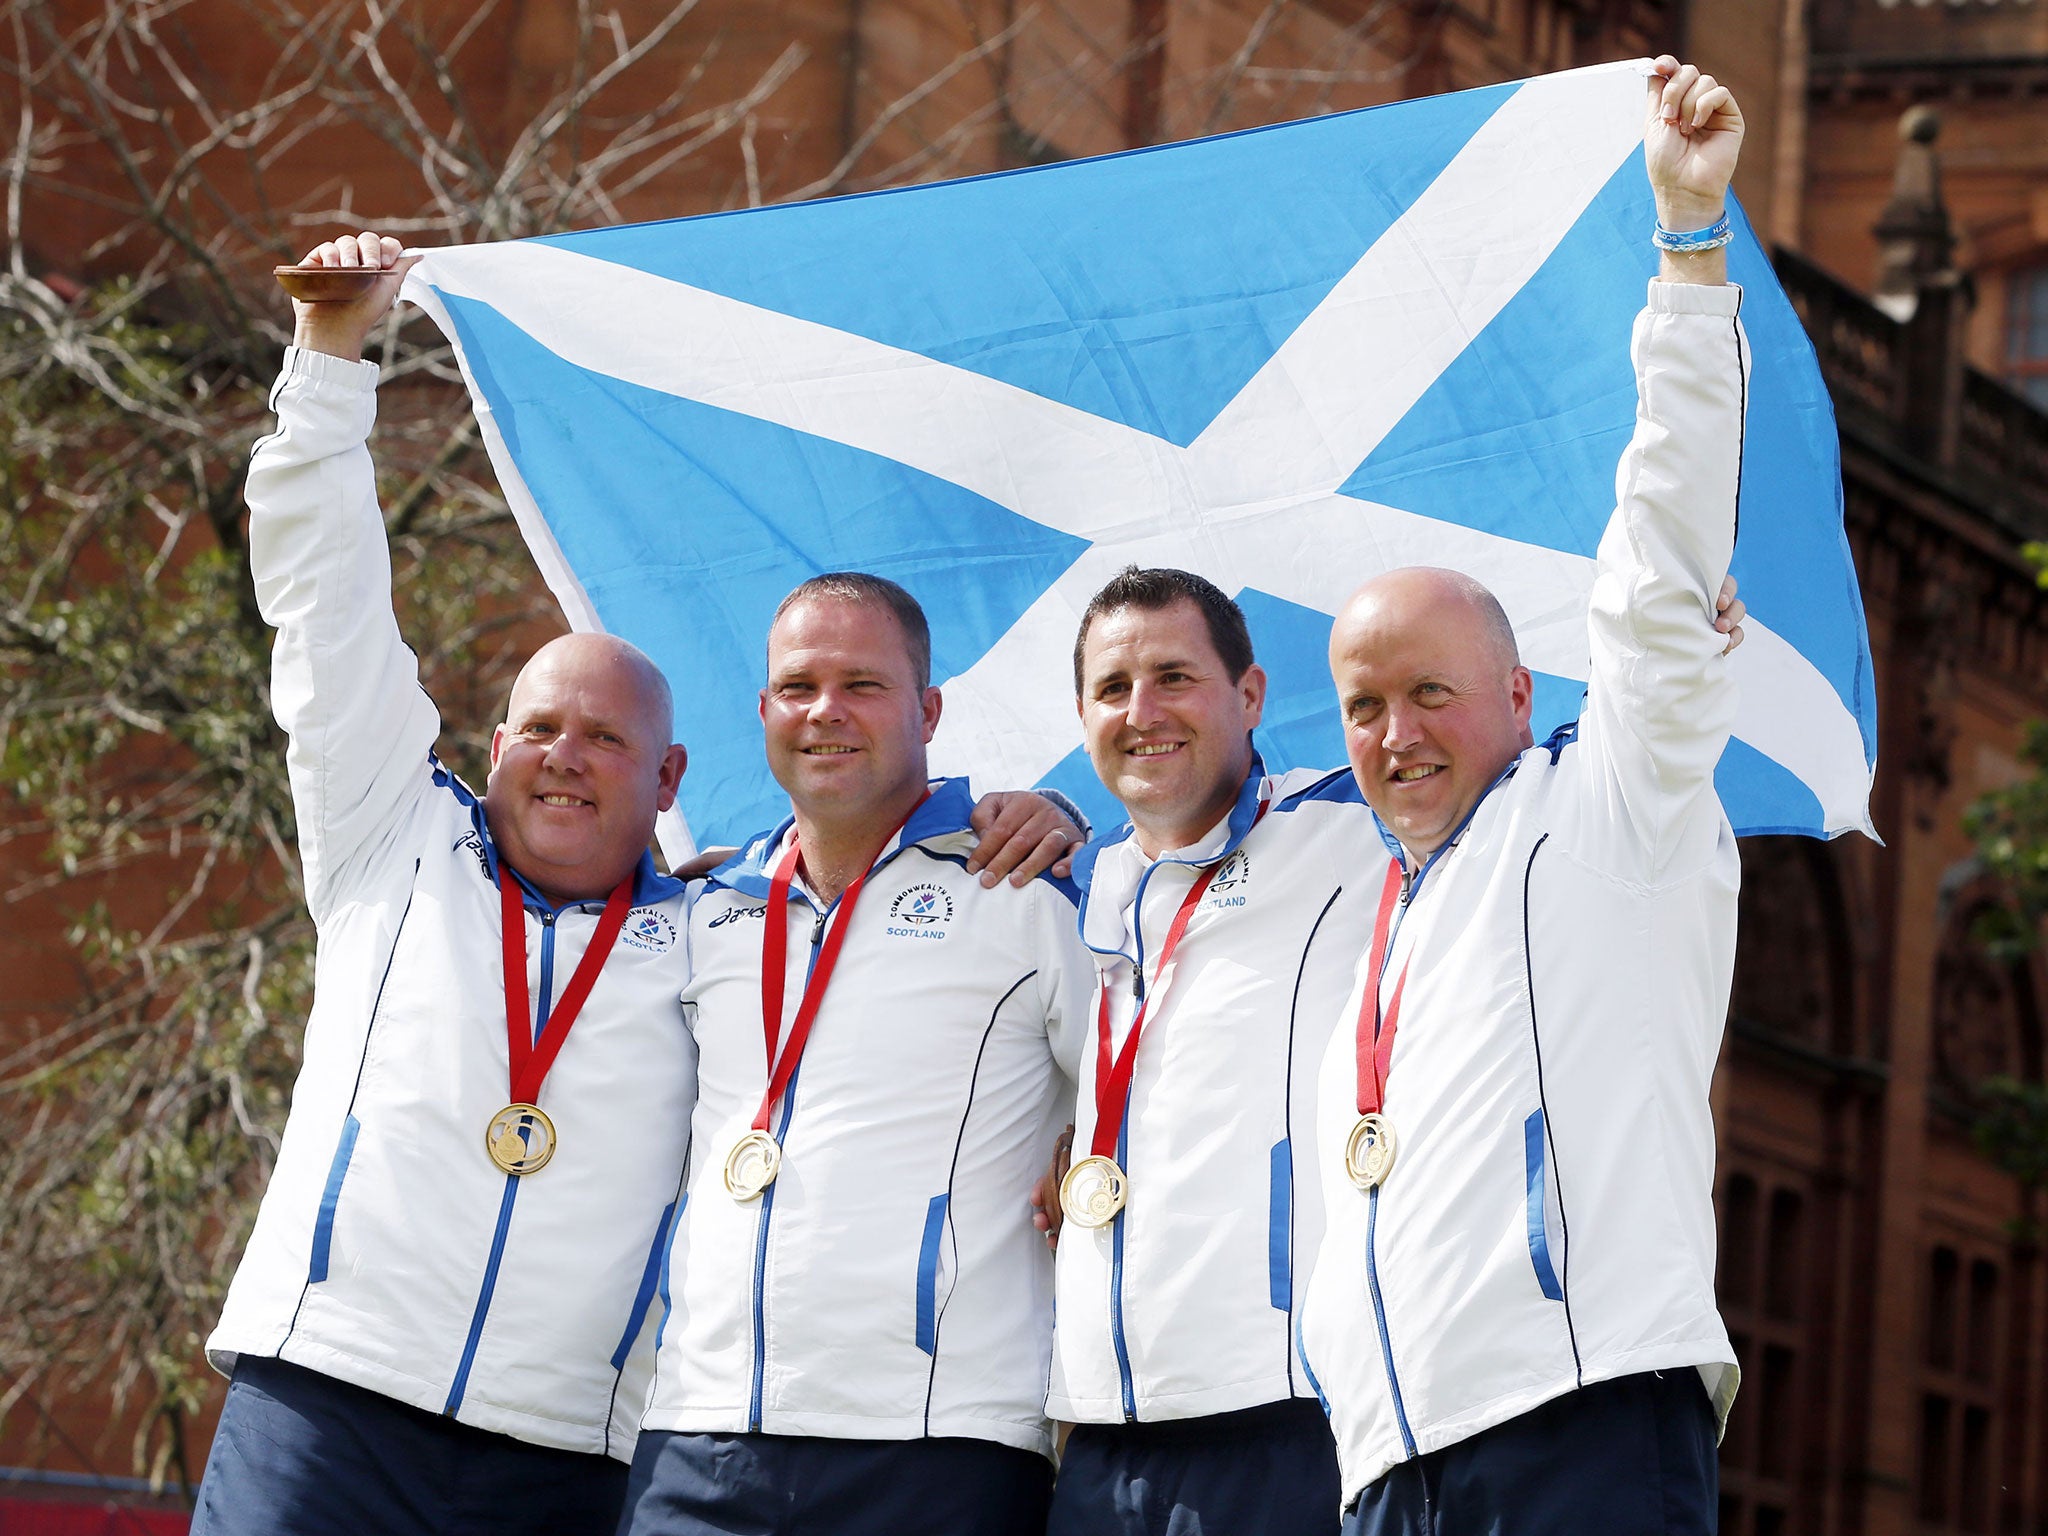 Men’s fours champions (left to right) Alex Marshall, Paul Foster, Neil Speirs and David Peacock celebrate
winning gold yesterday